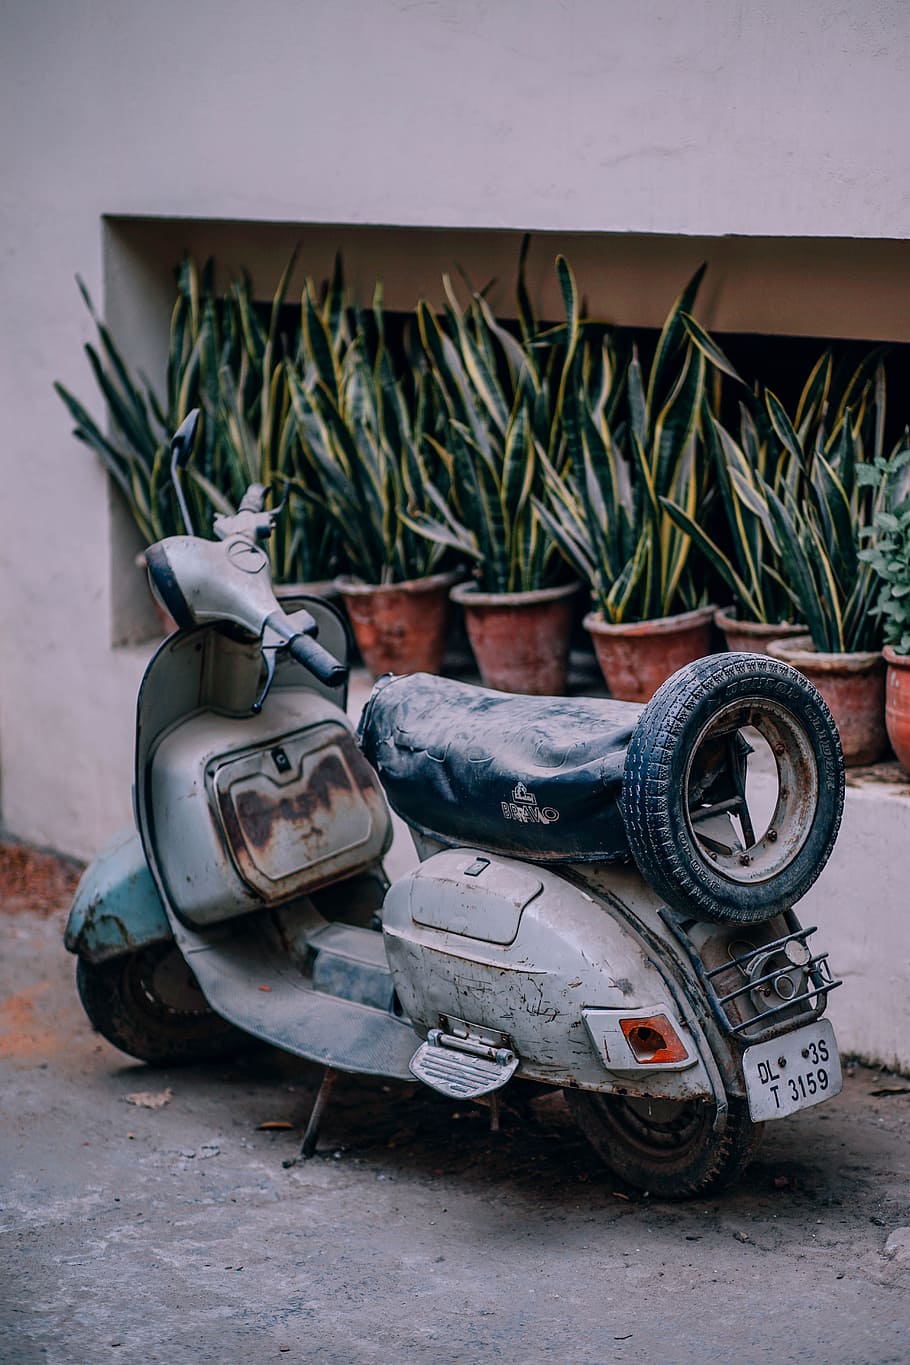 grey motor scooter parked near snake plants at daytime, ancient, HD wallpaper